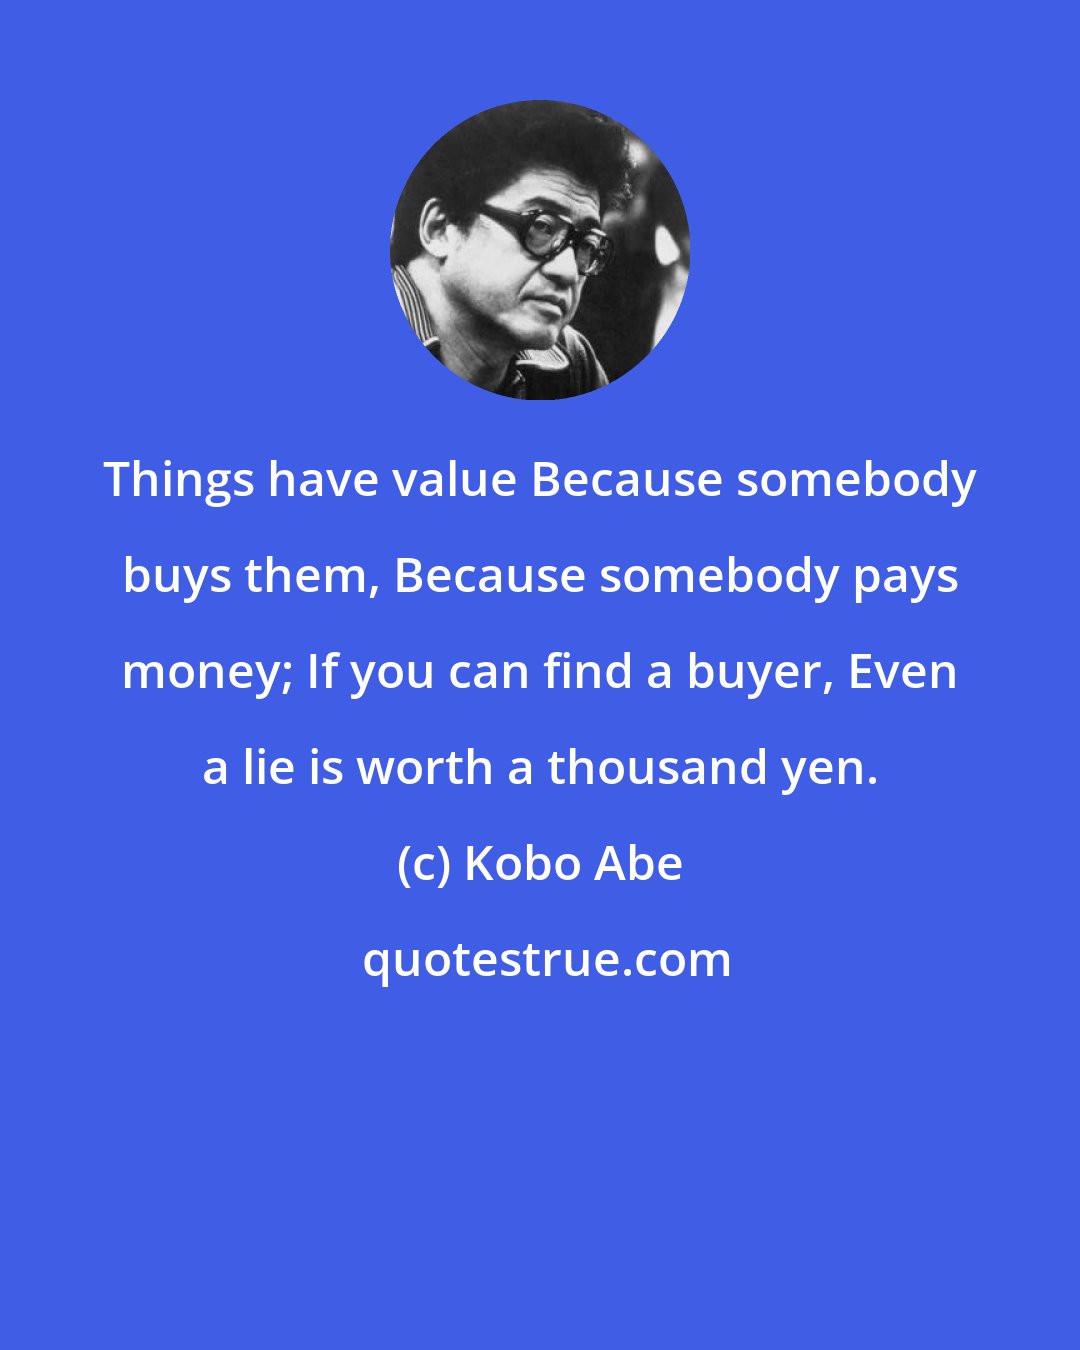 Kobo Abe: Things have value Because somebody buys them, Because somebody pays money; If you can find a buyer, Even a lie is worth a thousand yen.